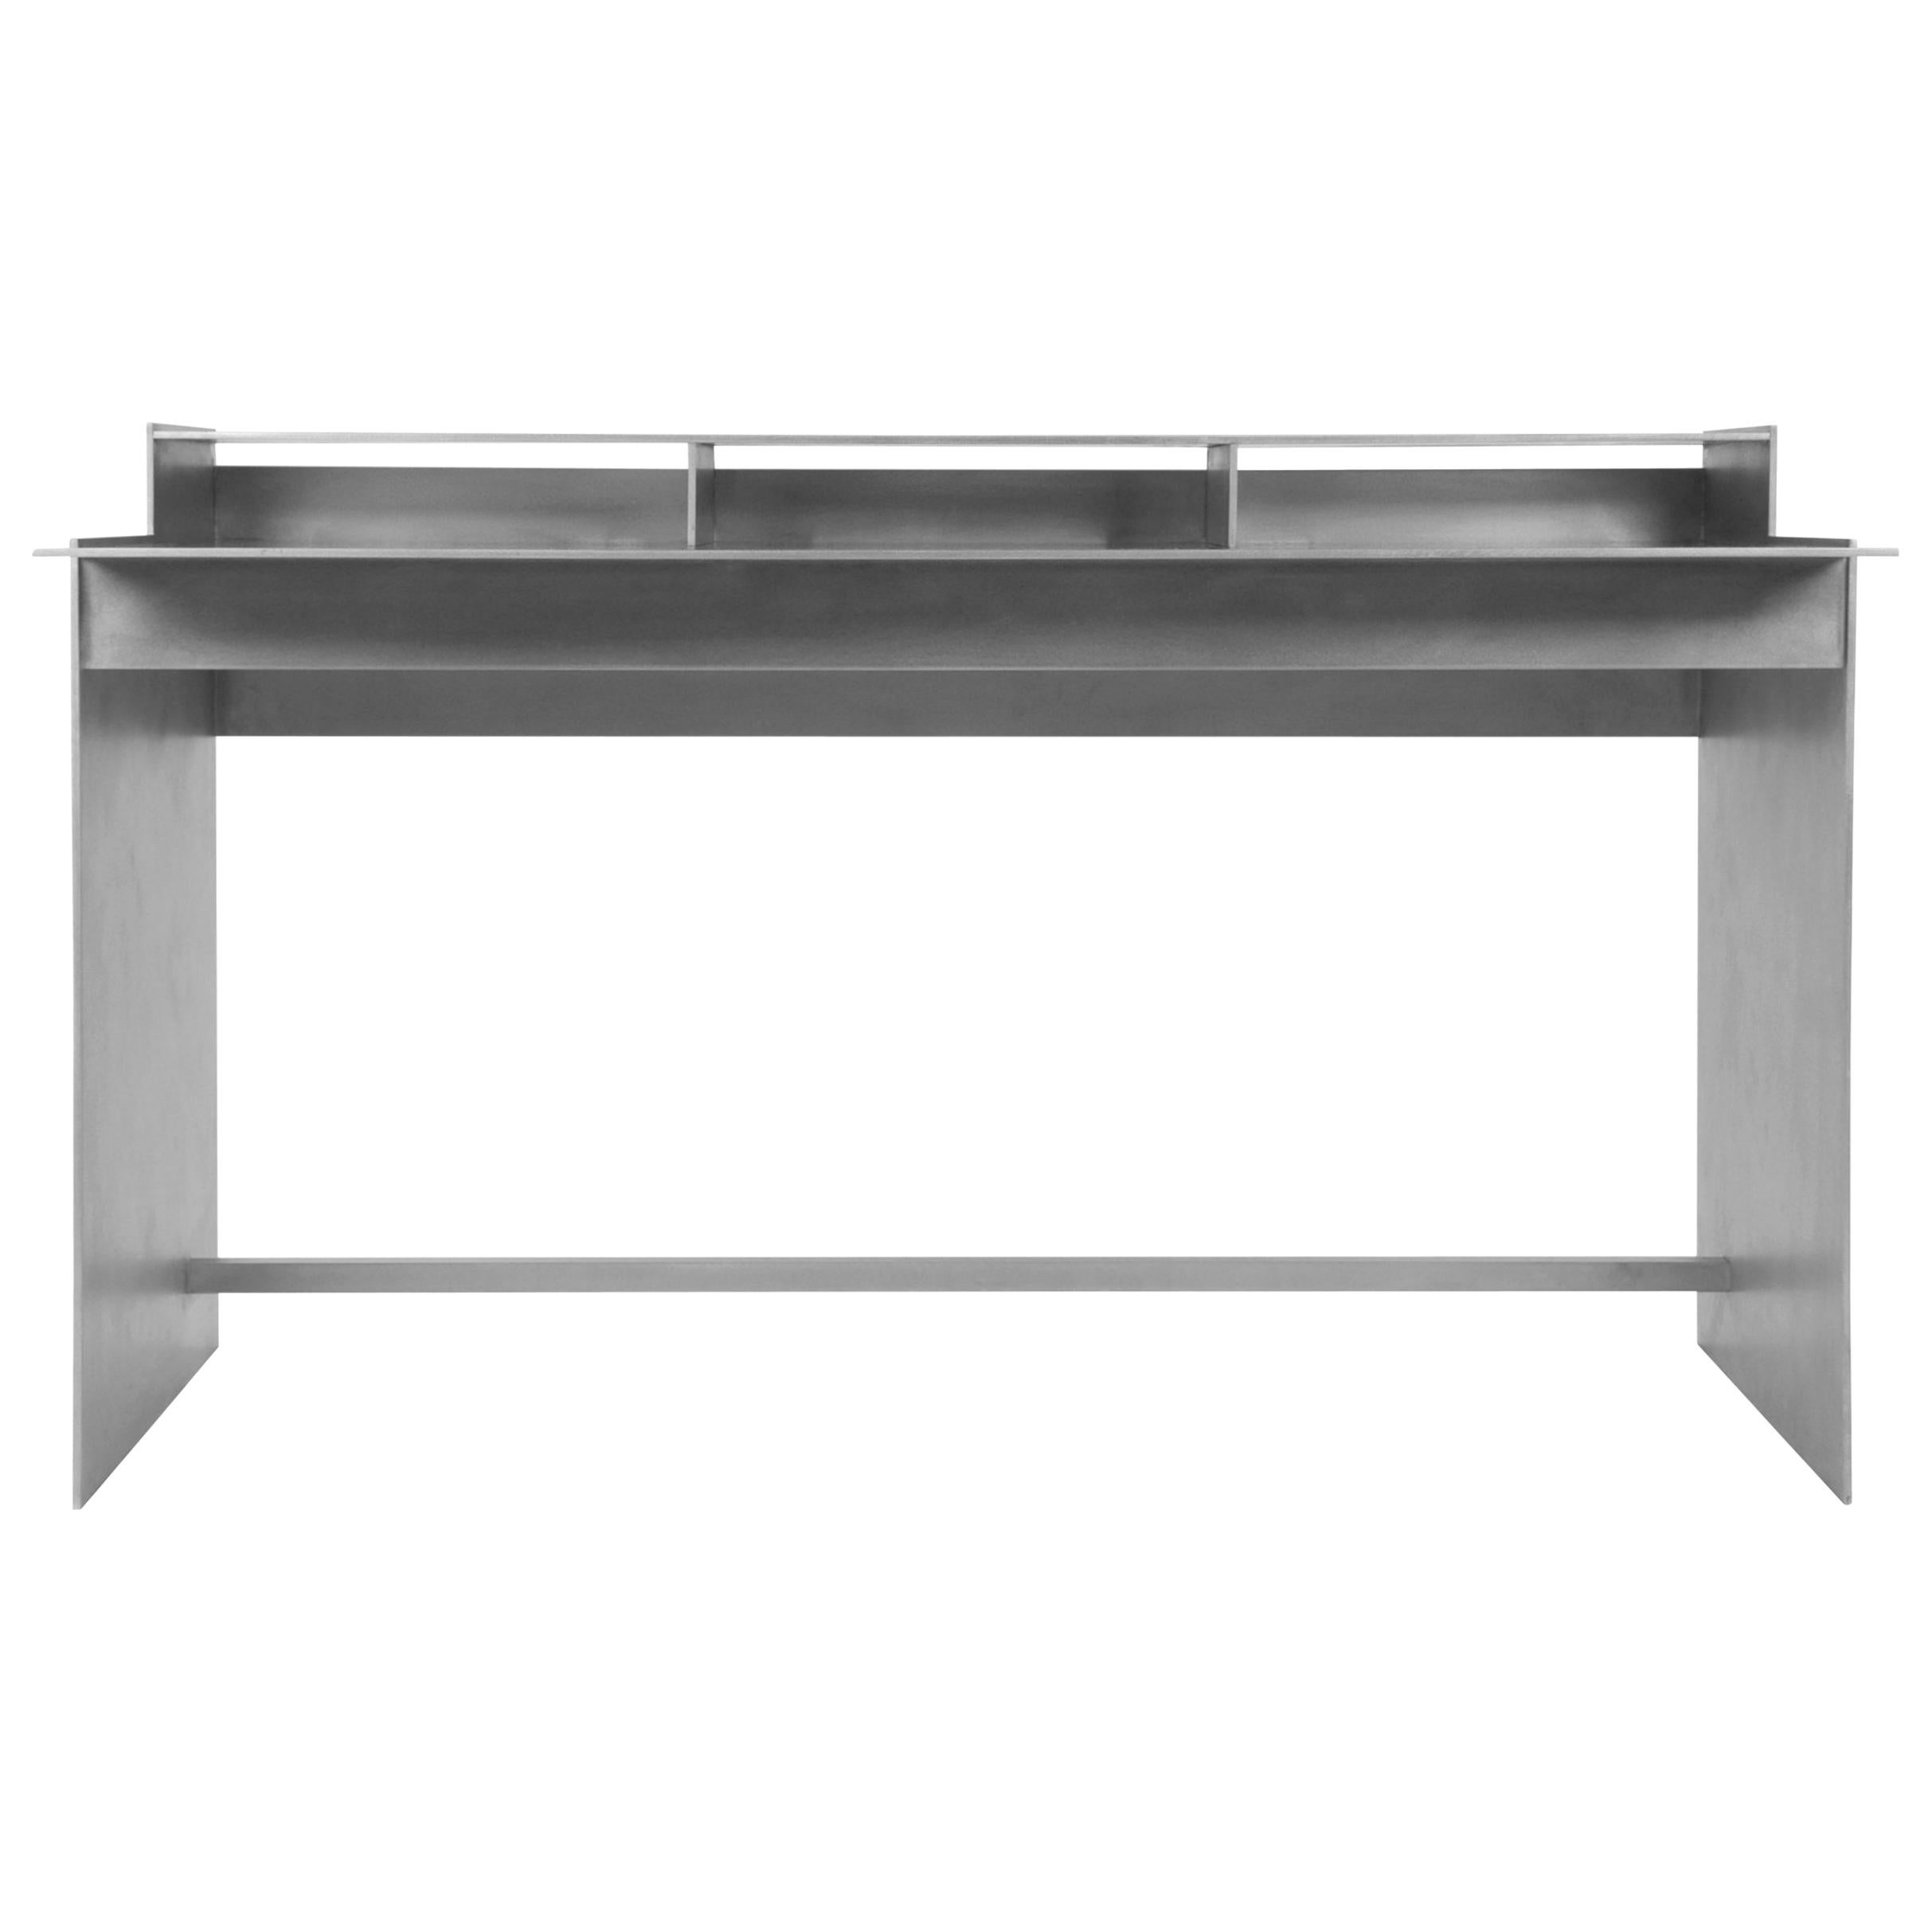 General Desk by Jonathan Nesci in Wax Polished Aluminum Plate